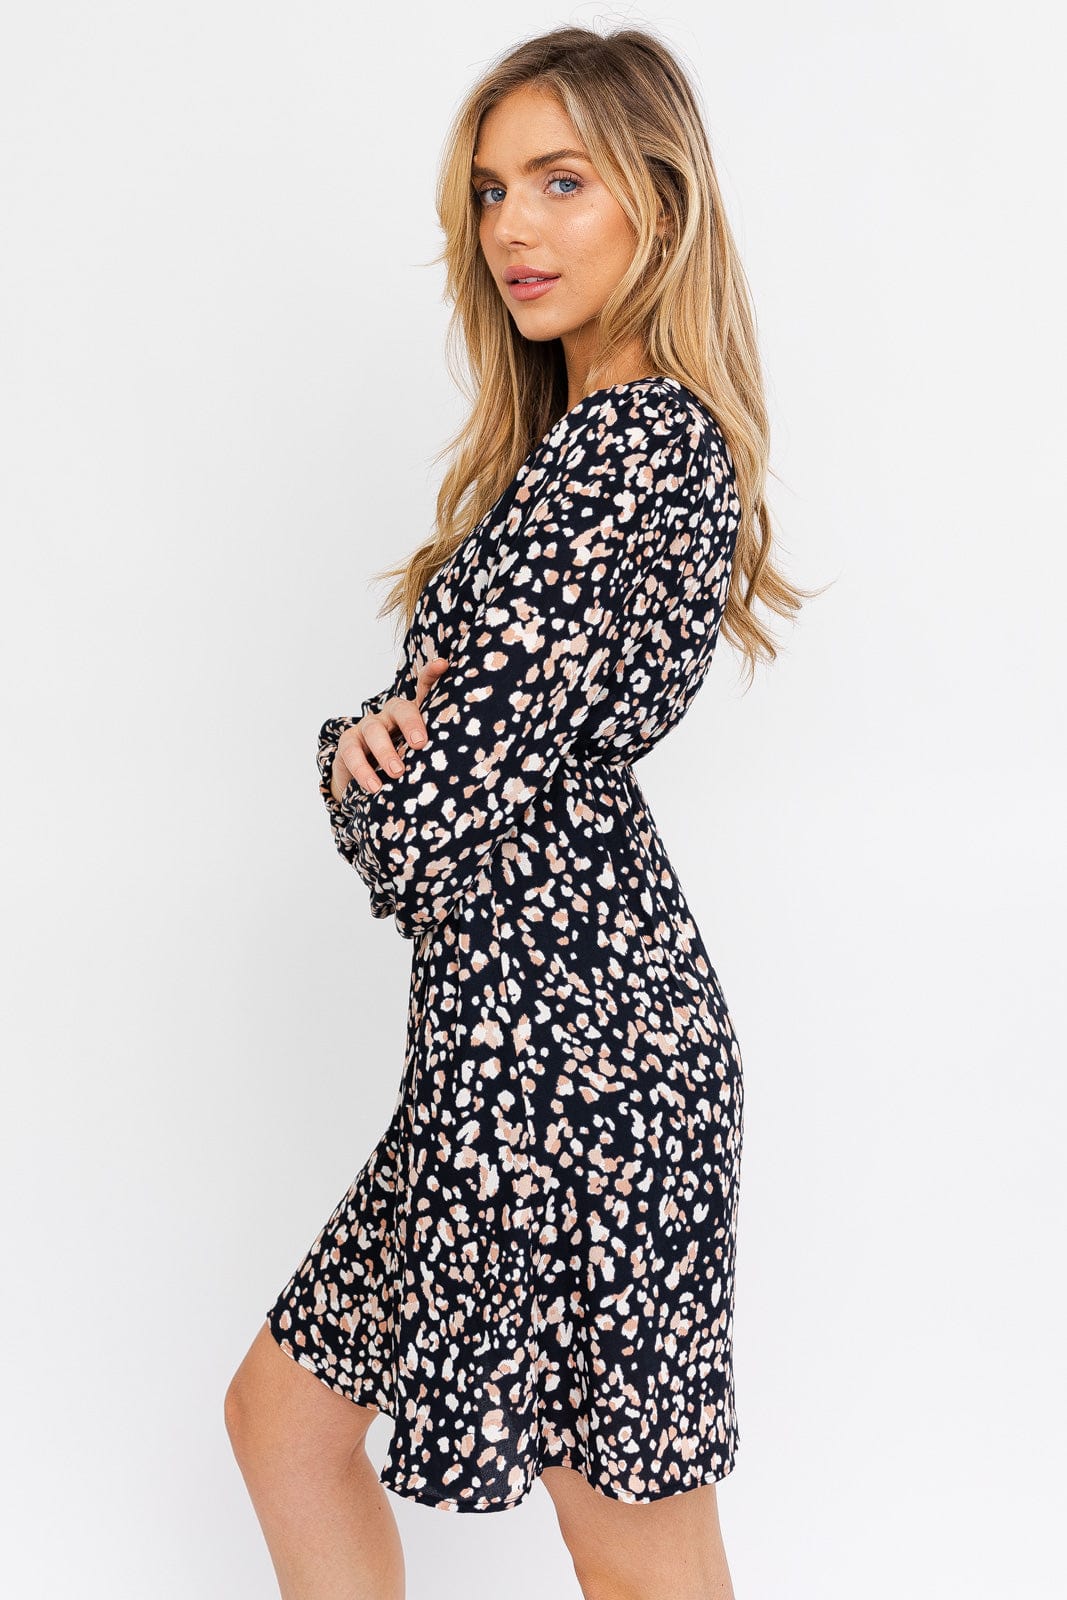 It's A Wrap Abstract Print Dress